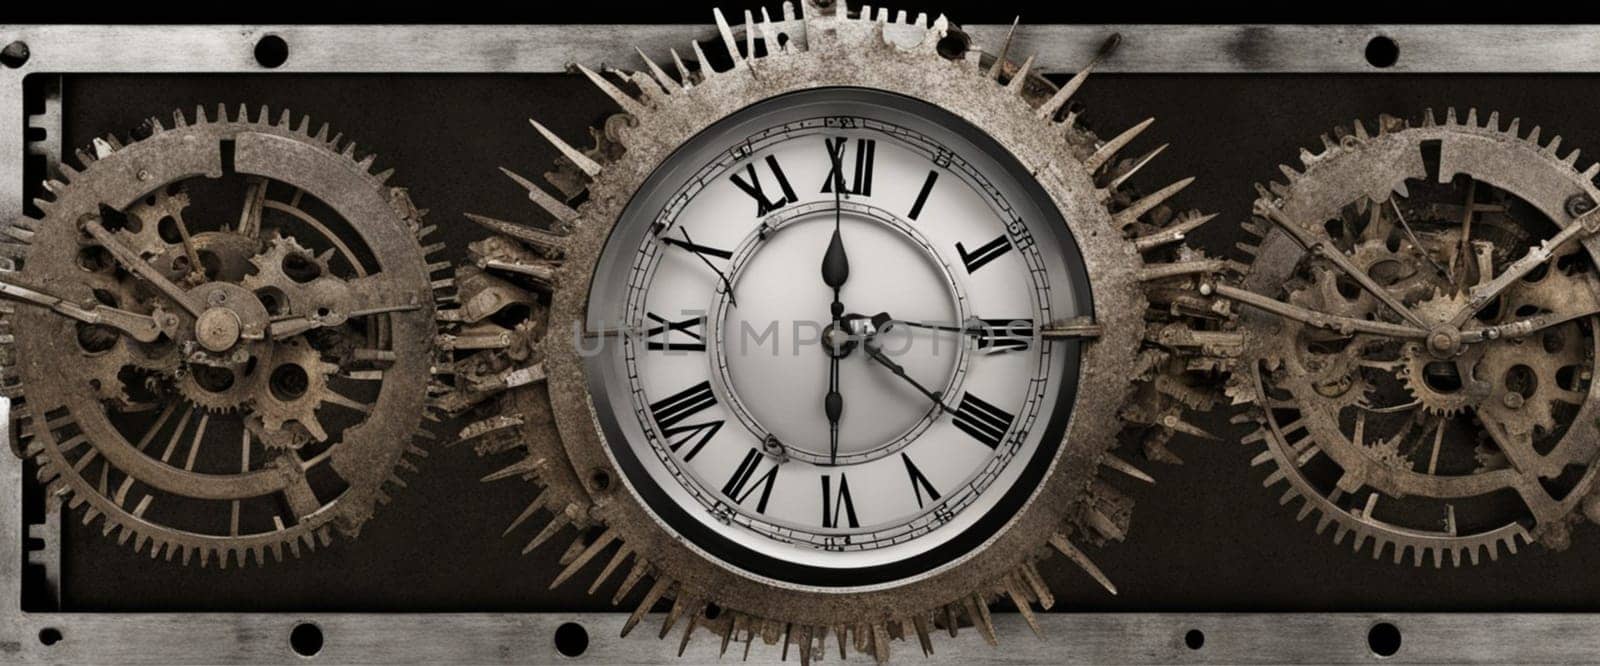 cogwheels in old clock illustration , time passing concept by verbano